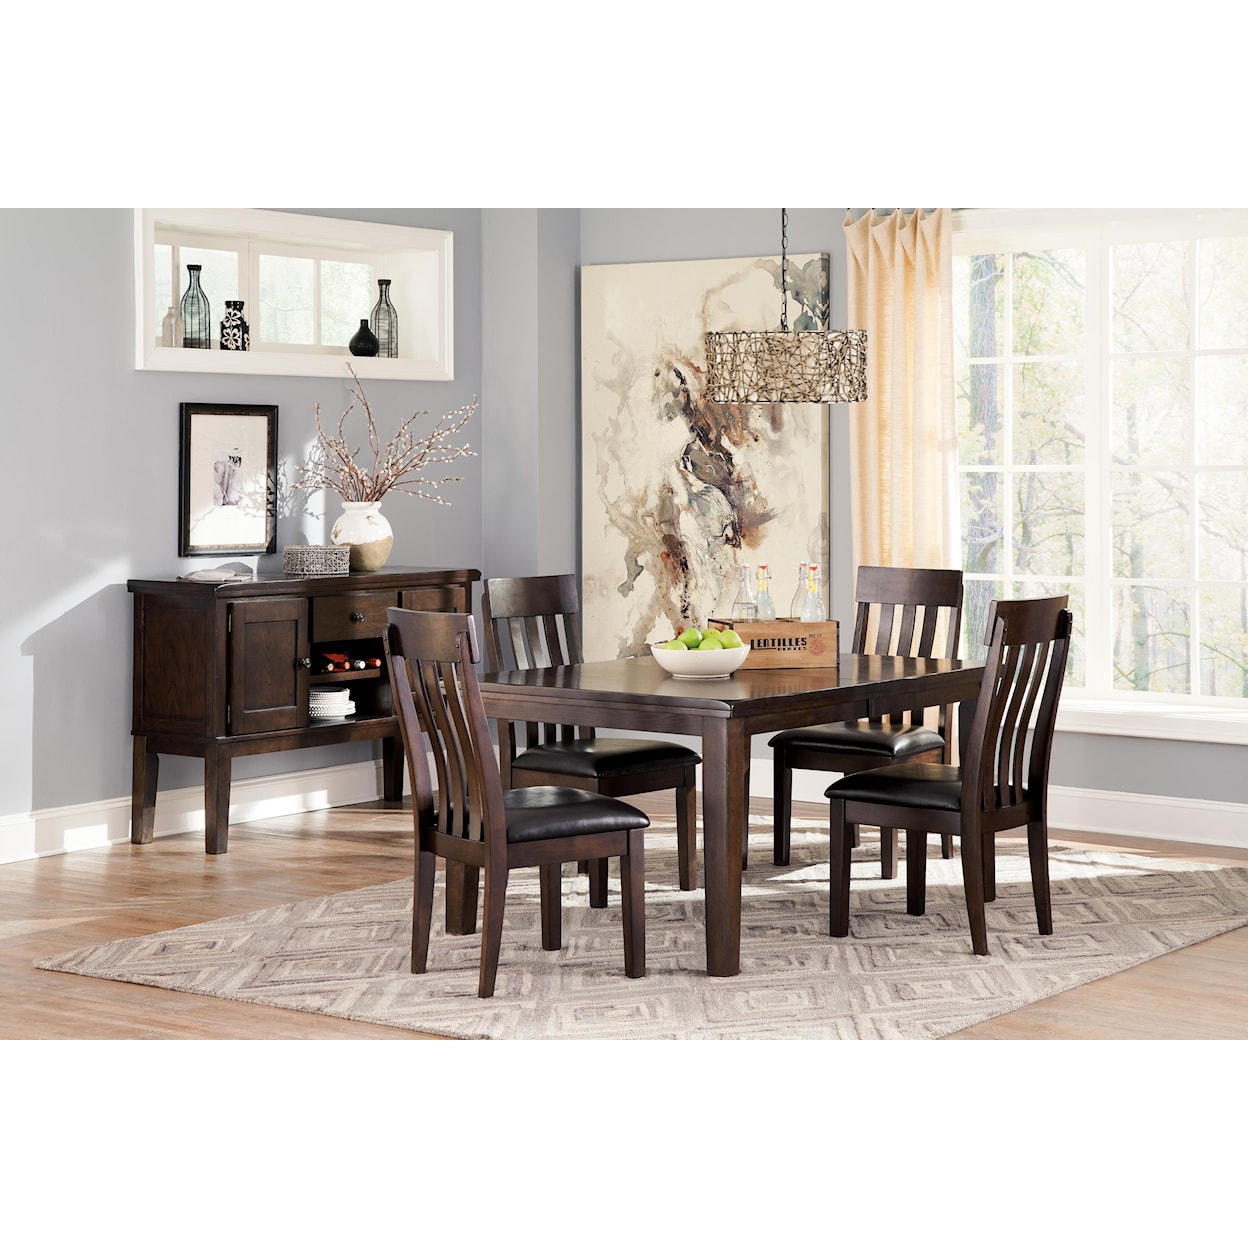 Signature Design by Ashley Haddigan Casual Dining Room Group